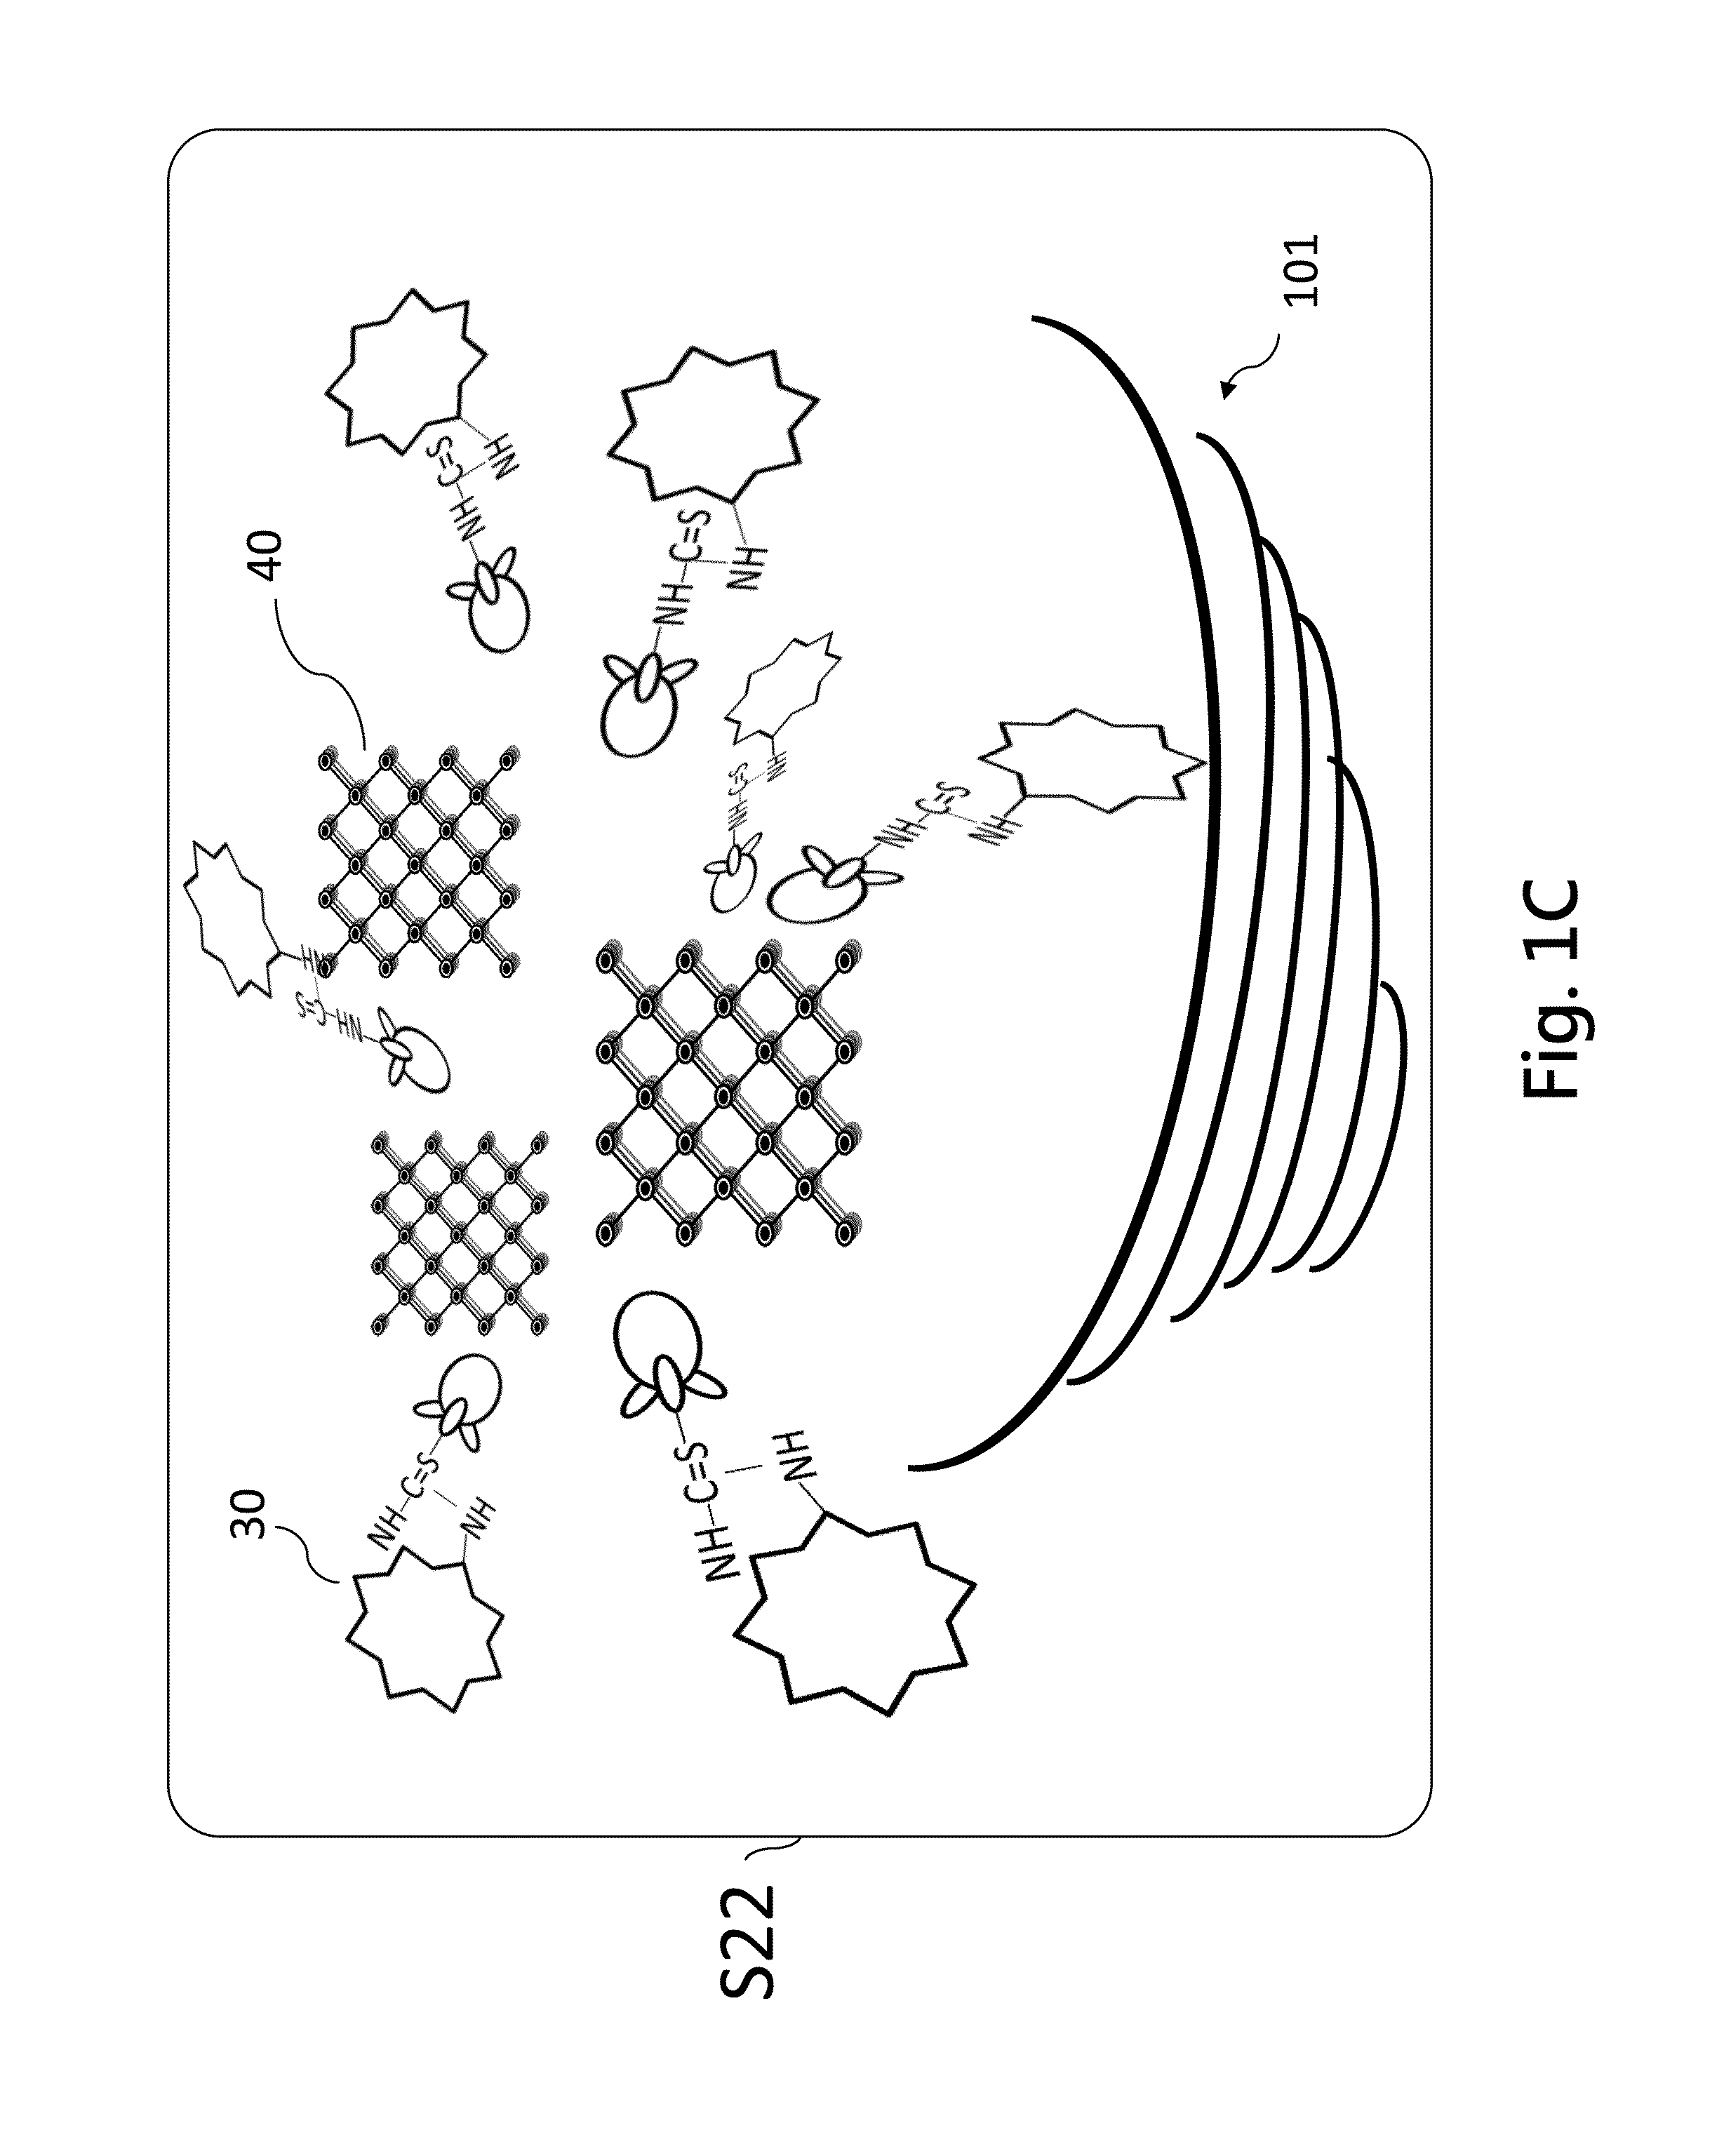 Molecule immobilization method and its system